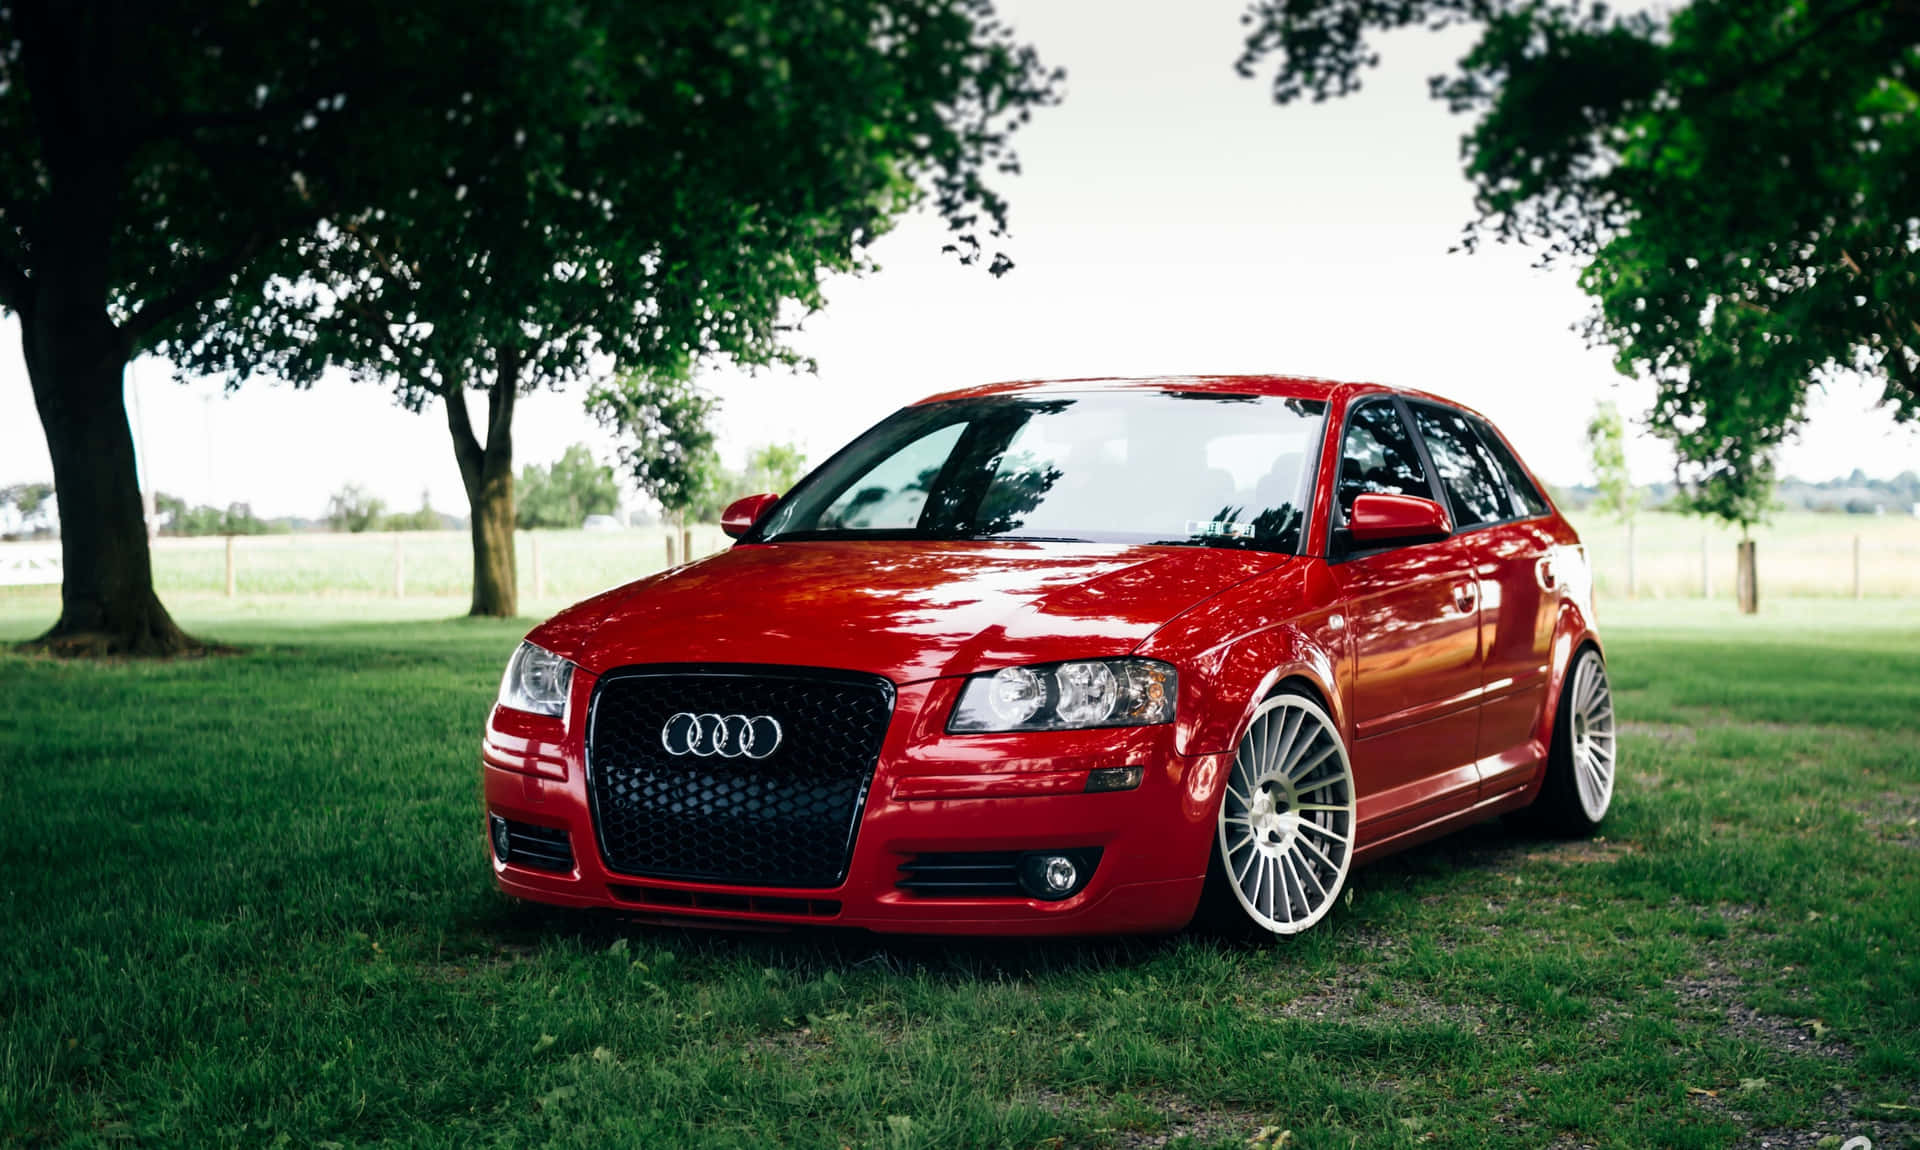 Luxurious Audi S3 In A Majestic Night Drive Wallpaper